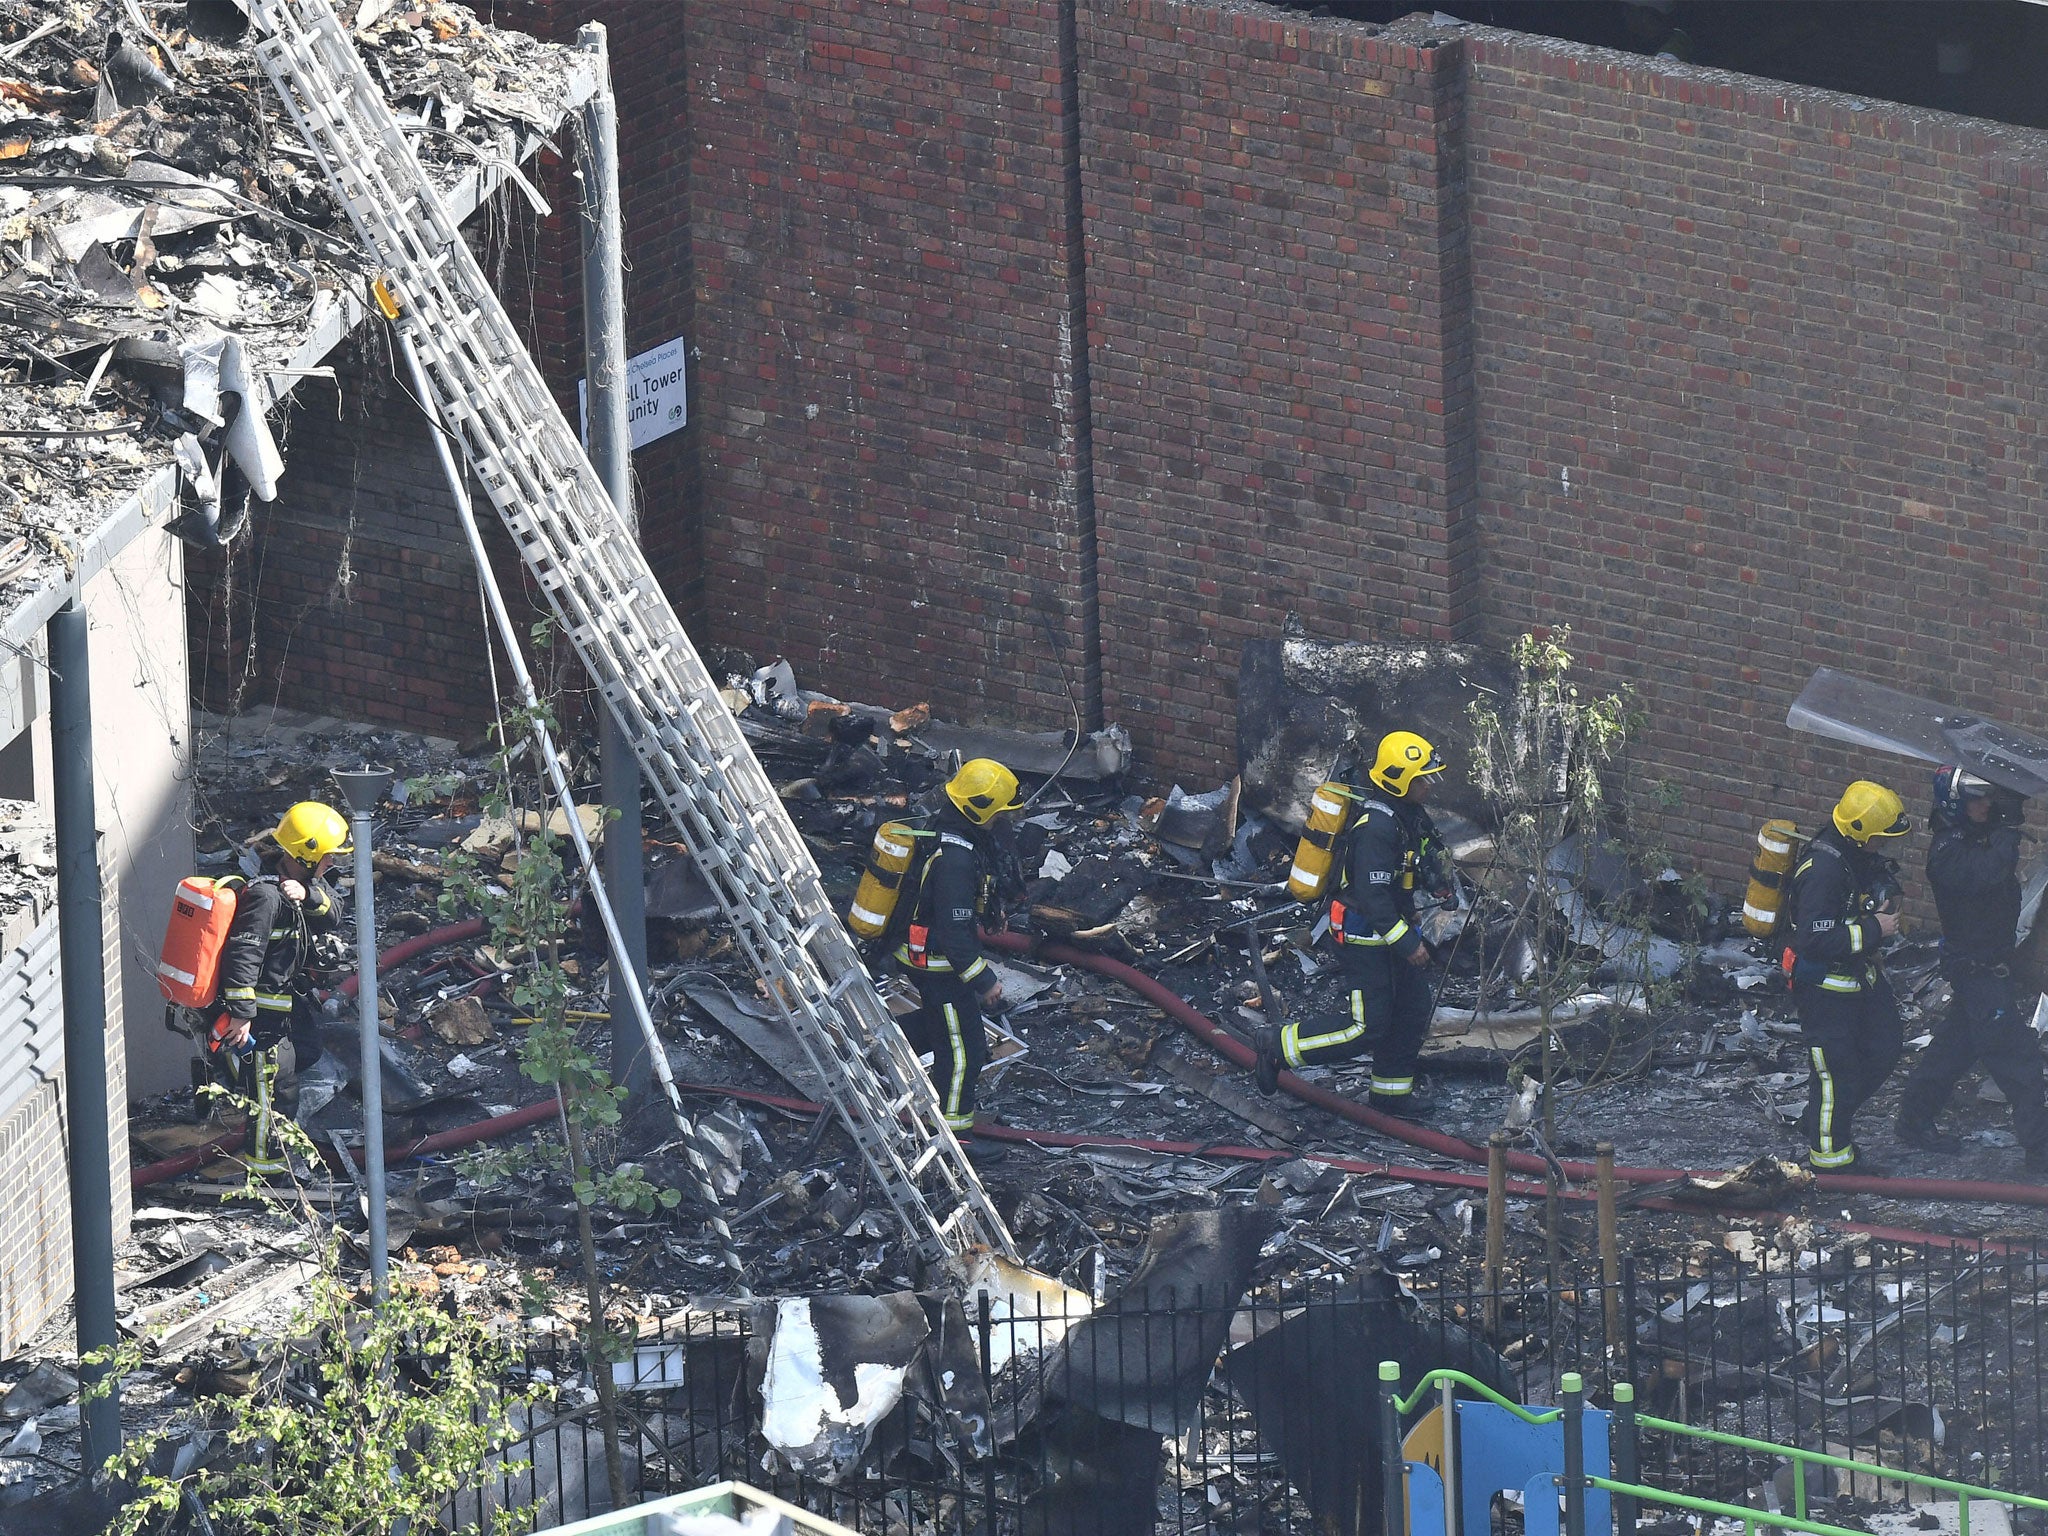 More than 200 firefighters were sent to tackle the blaze